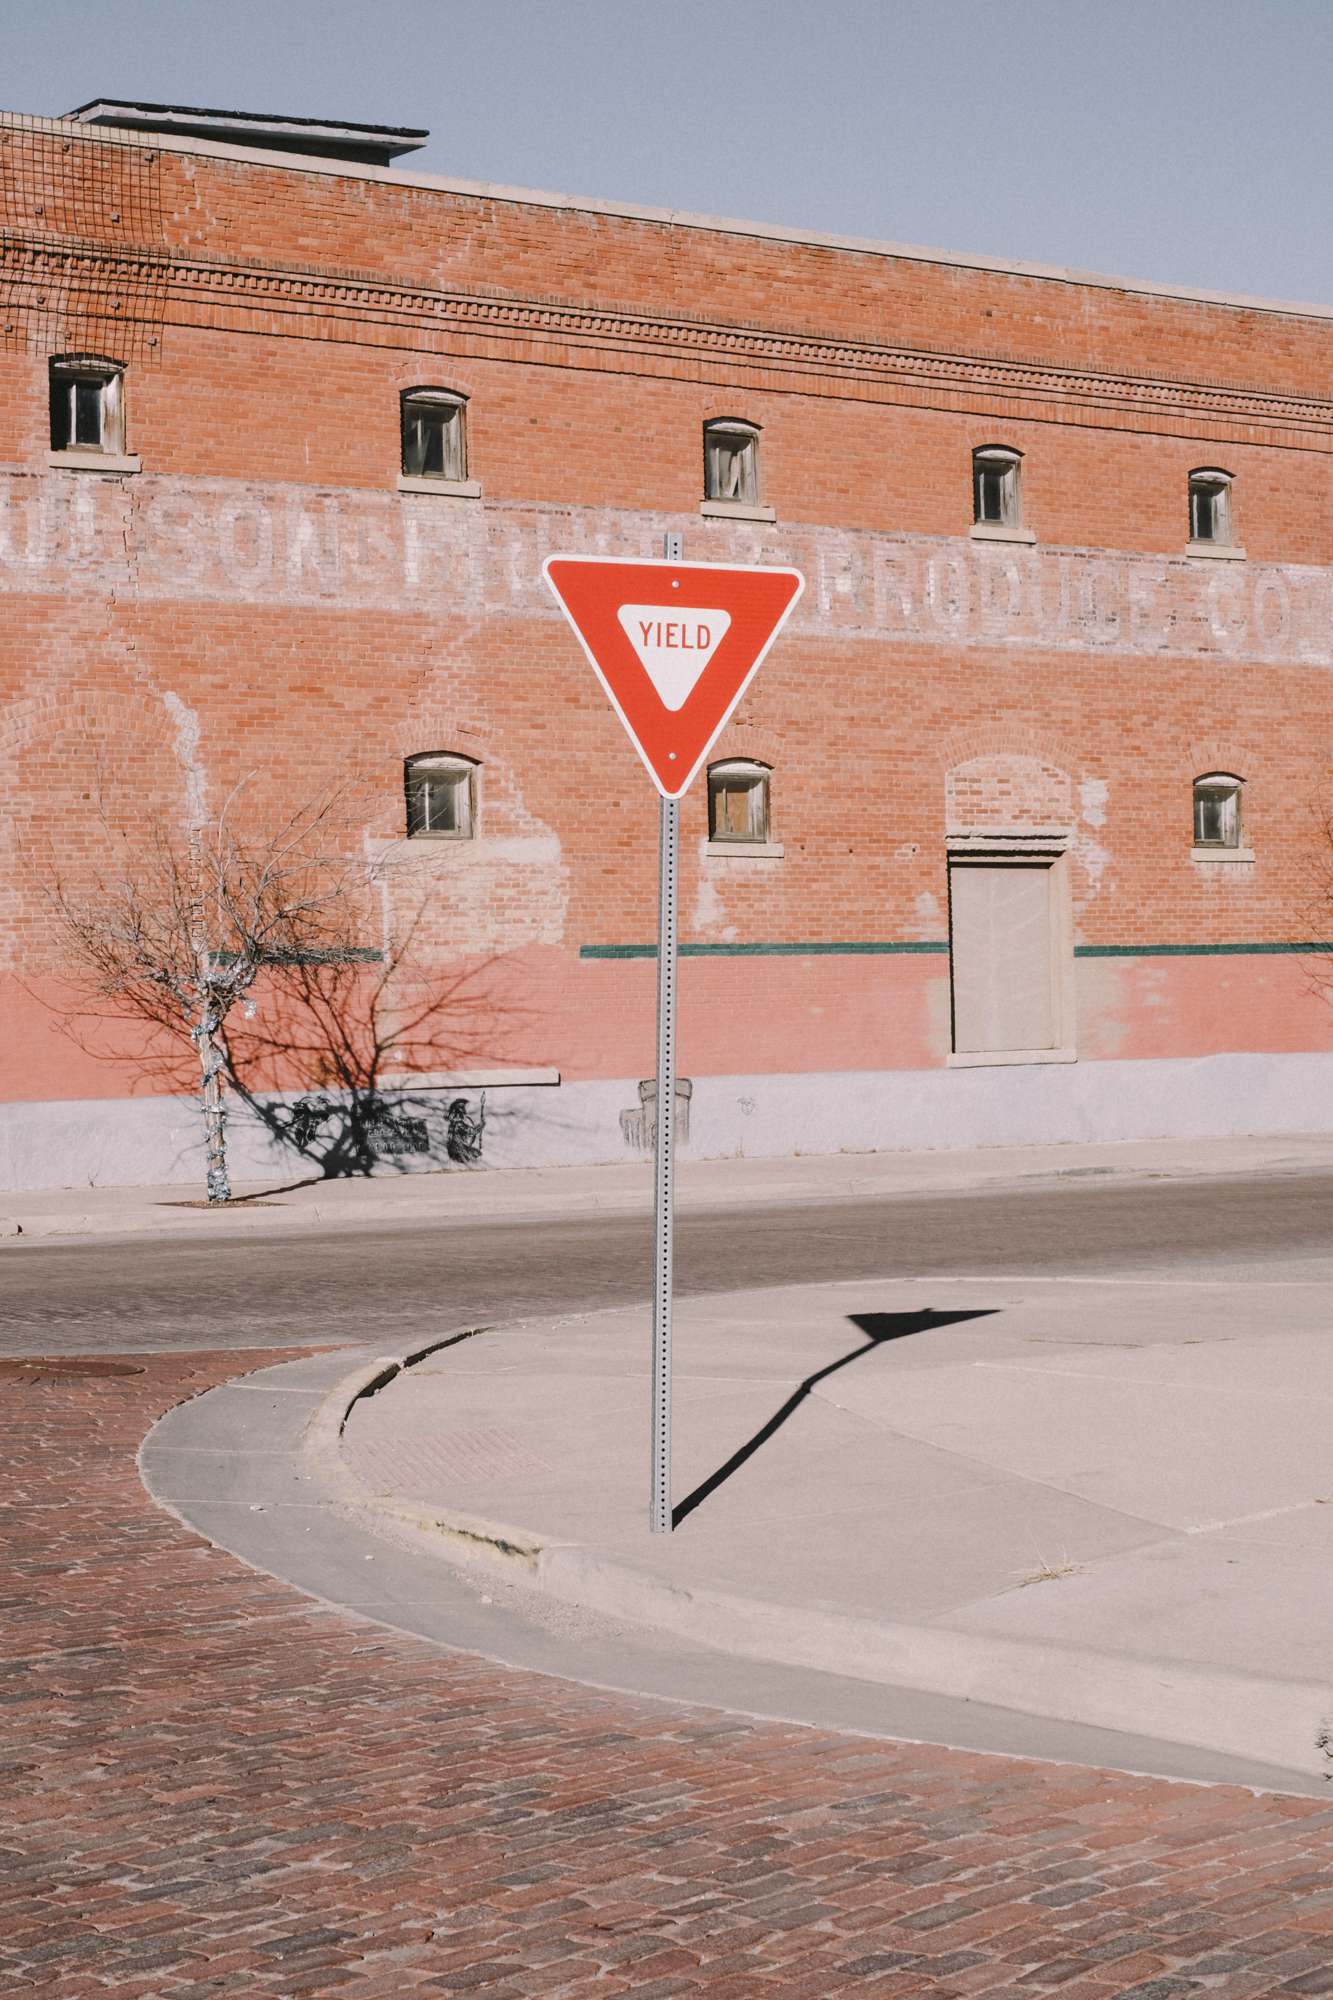 Yield Sign In Downtown Trinidad